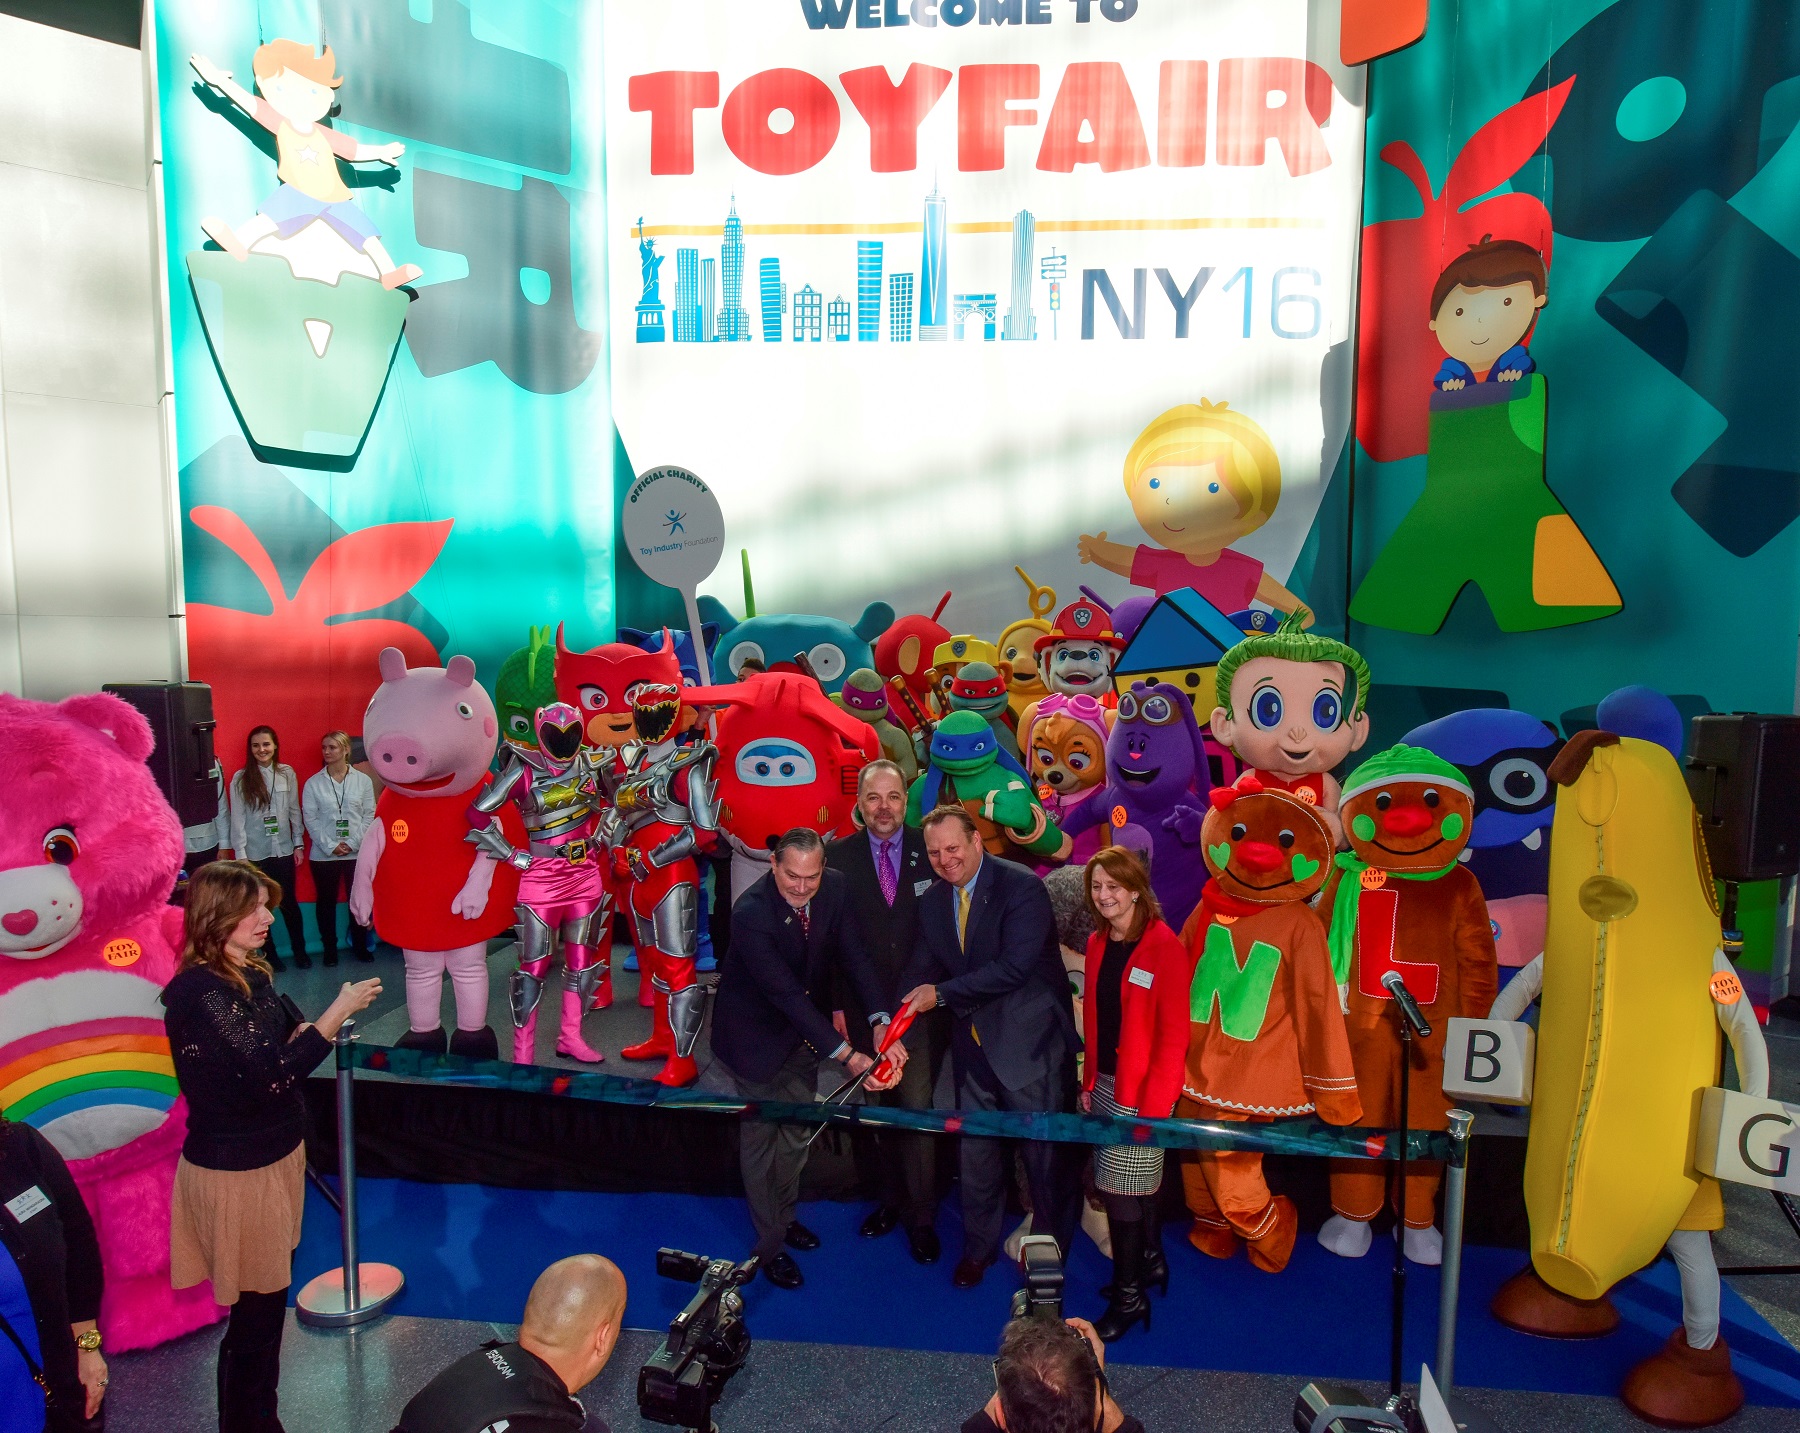 Toy Fair NY brings seven football fields of fun to NYC Trade Show ExPO